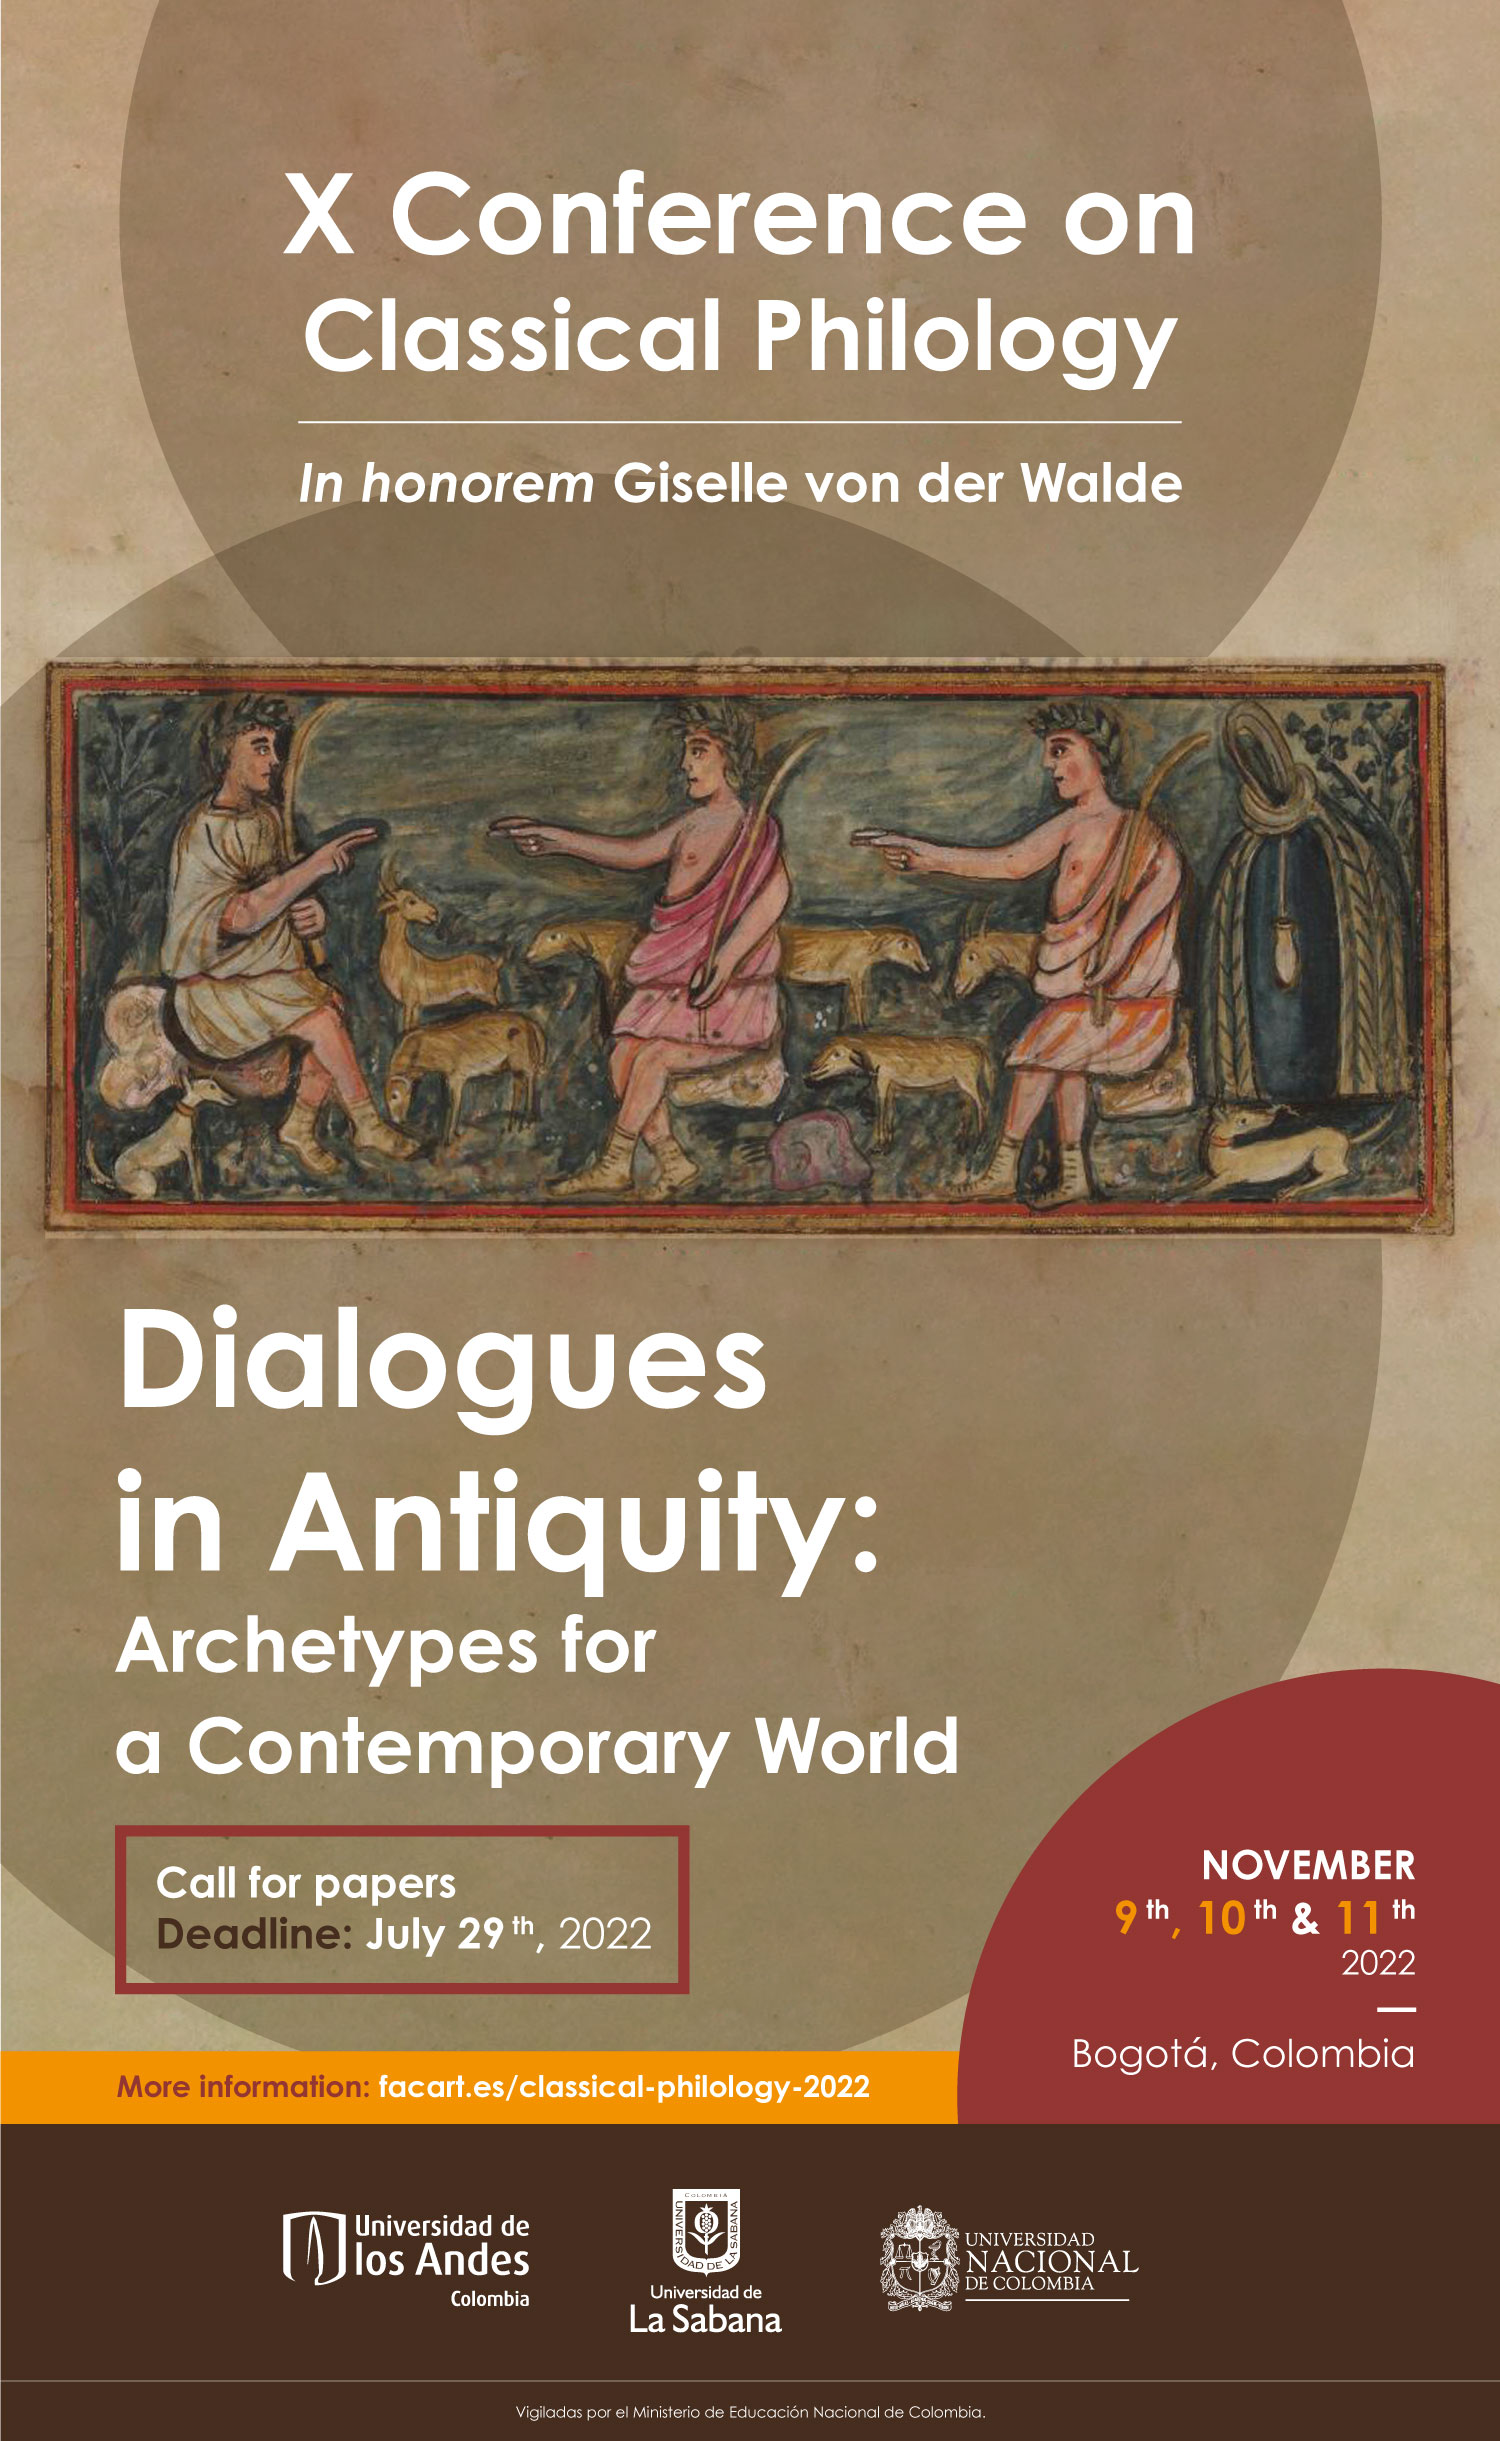 Call for proposals X Conference on Classical Philology in honorem Giselle von der Walde